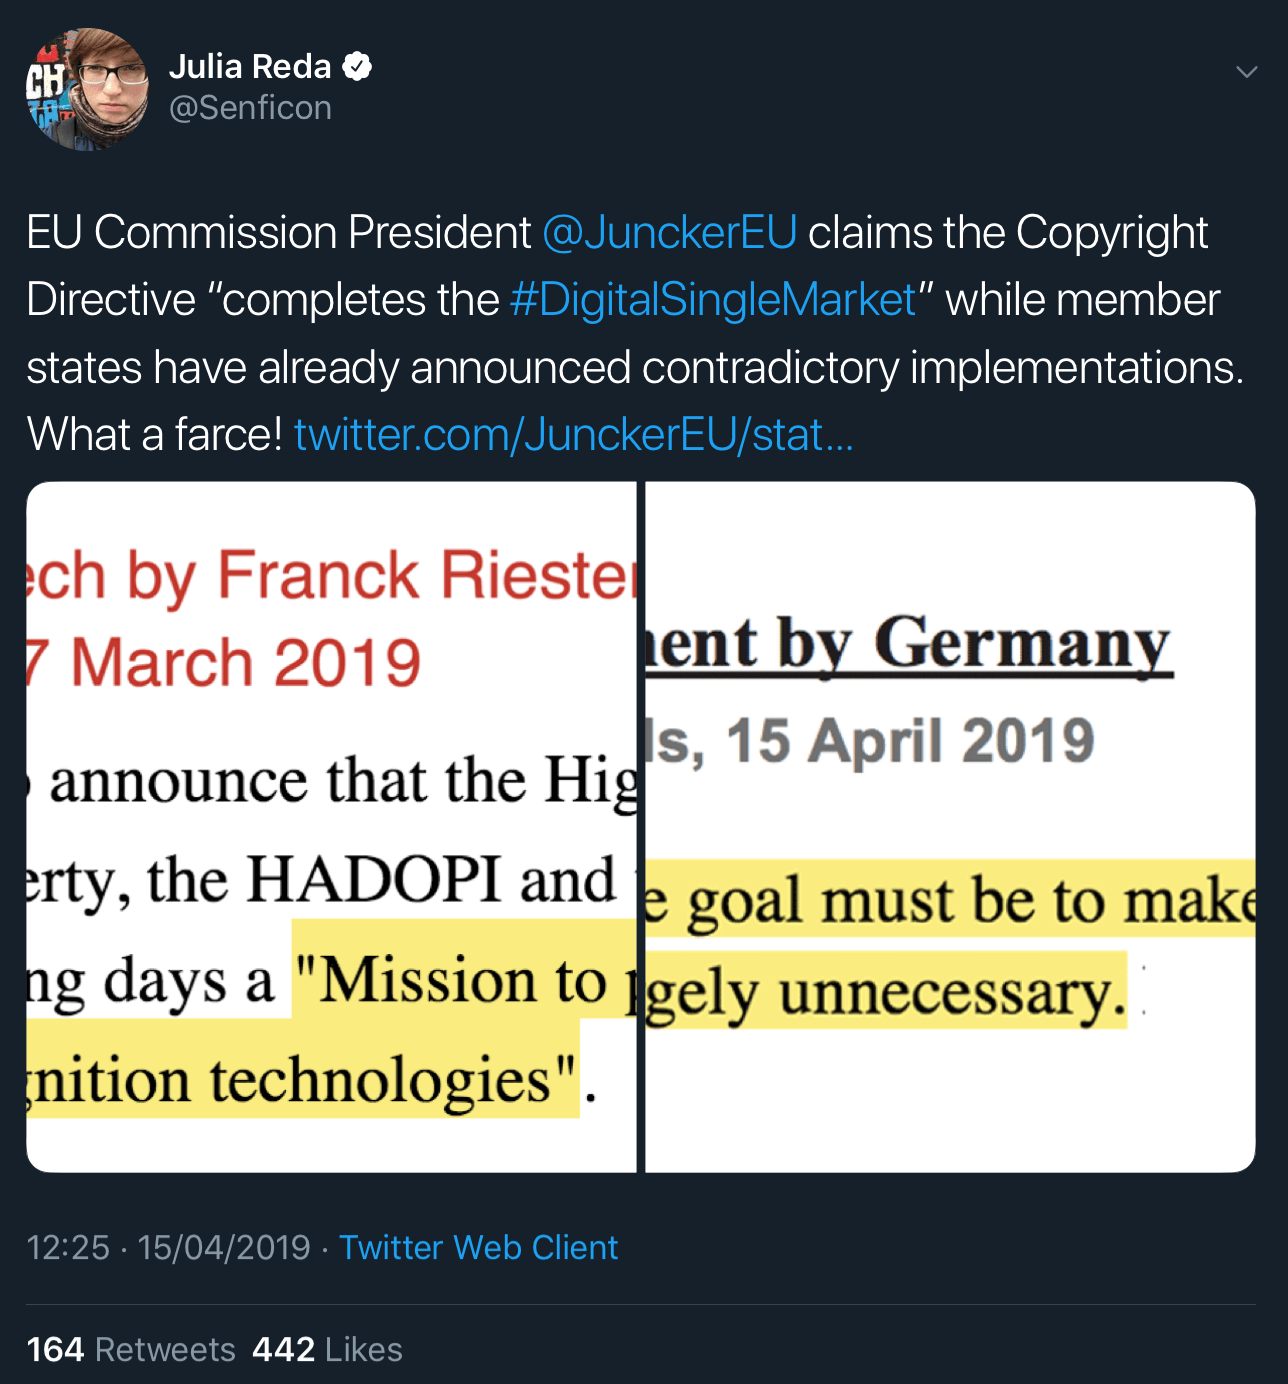 Julia Reda's tweet about France and Germany's conflicting statements on Article 13's requirement for online platforms to start using upload filters.